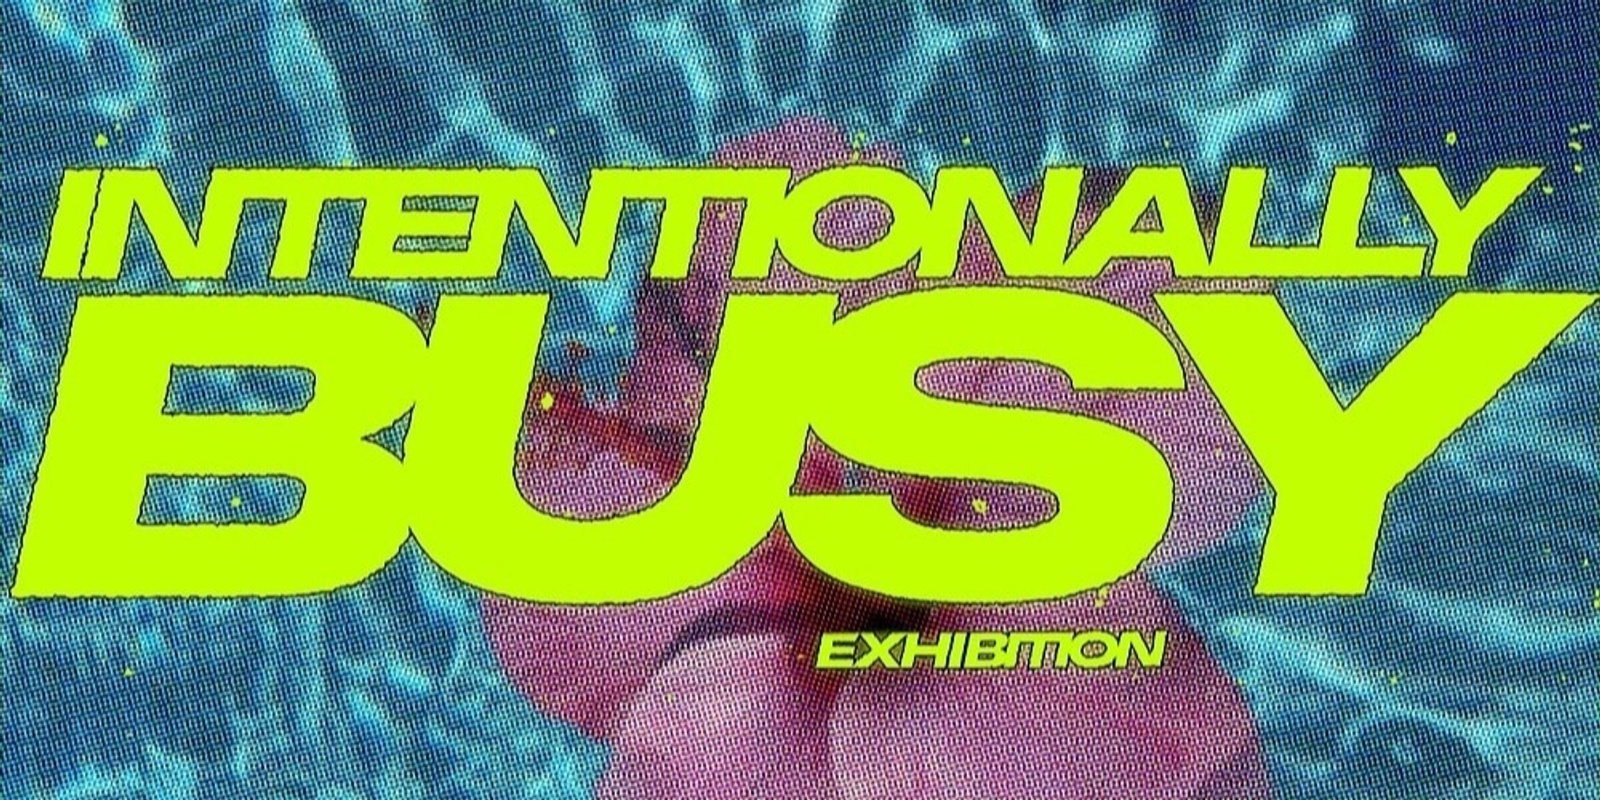 "Intentionally Busy" Art Exhibition X SWEAT Premiere